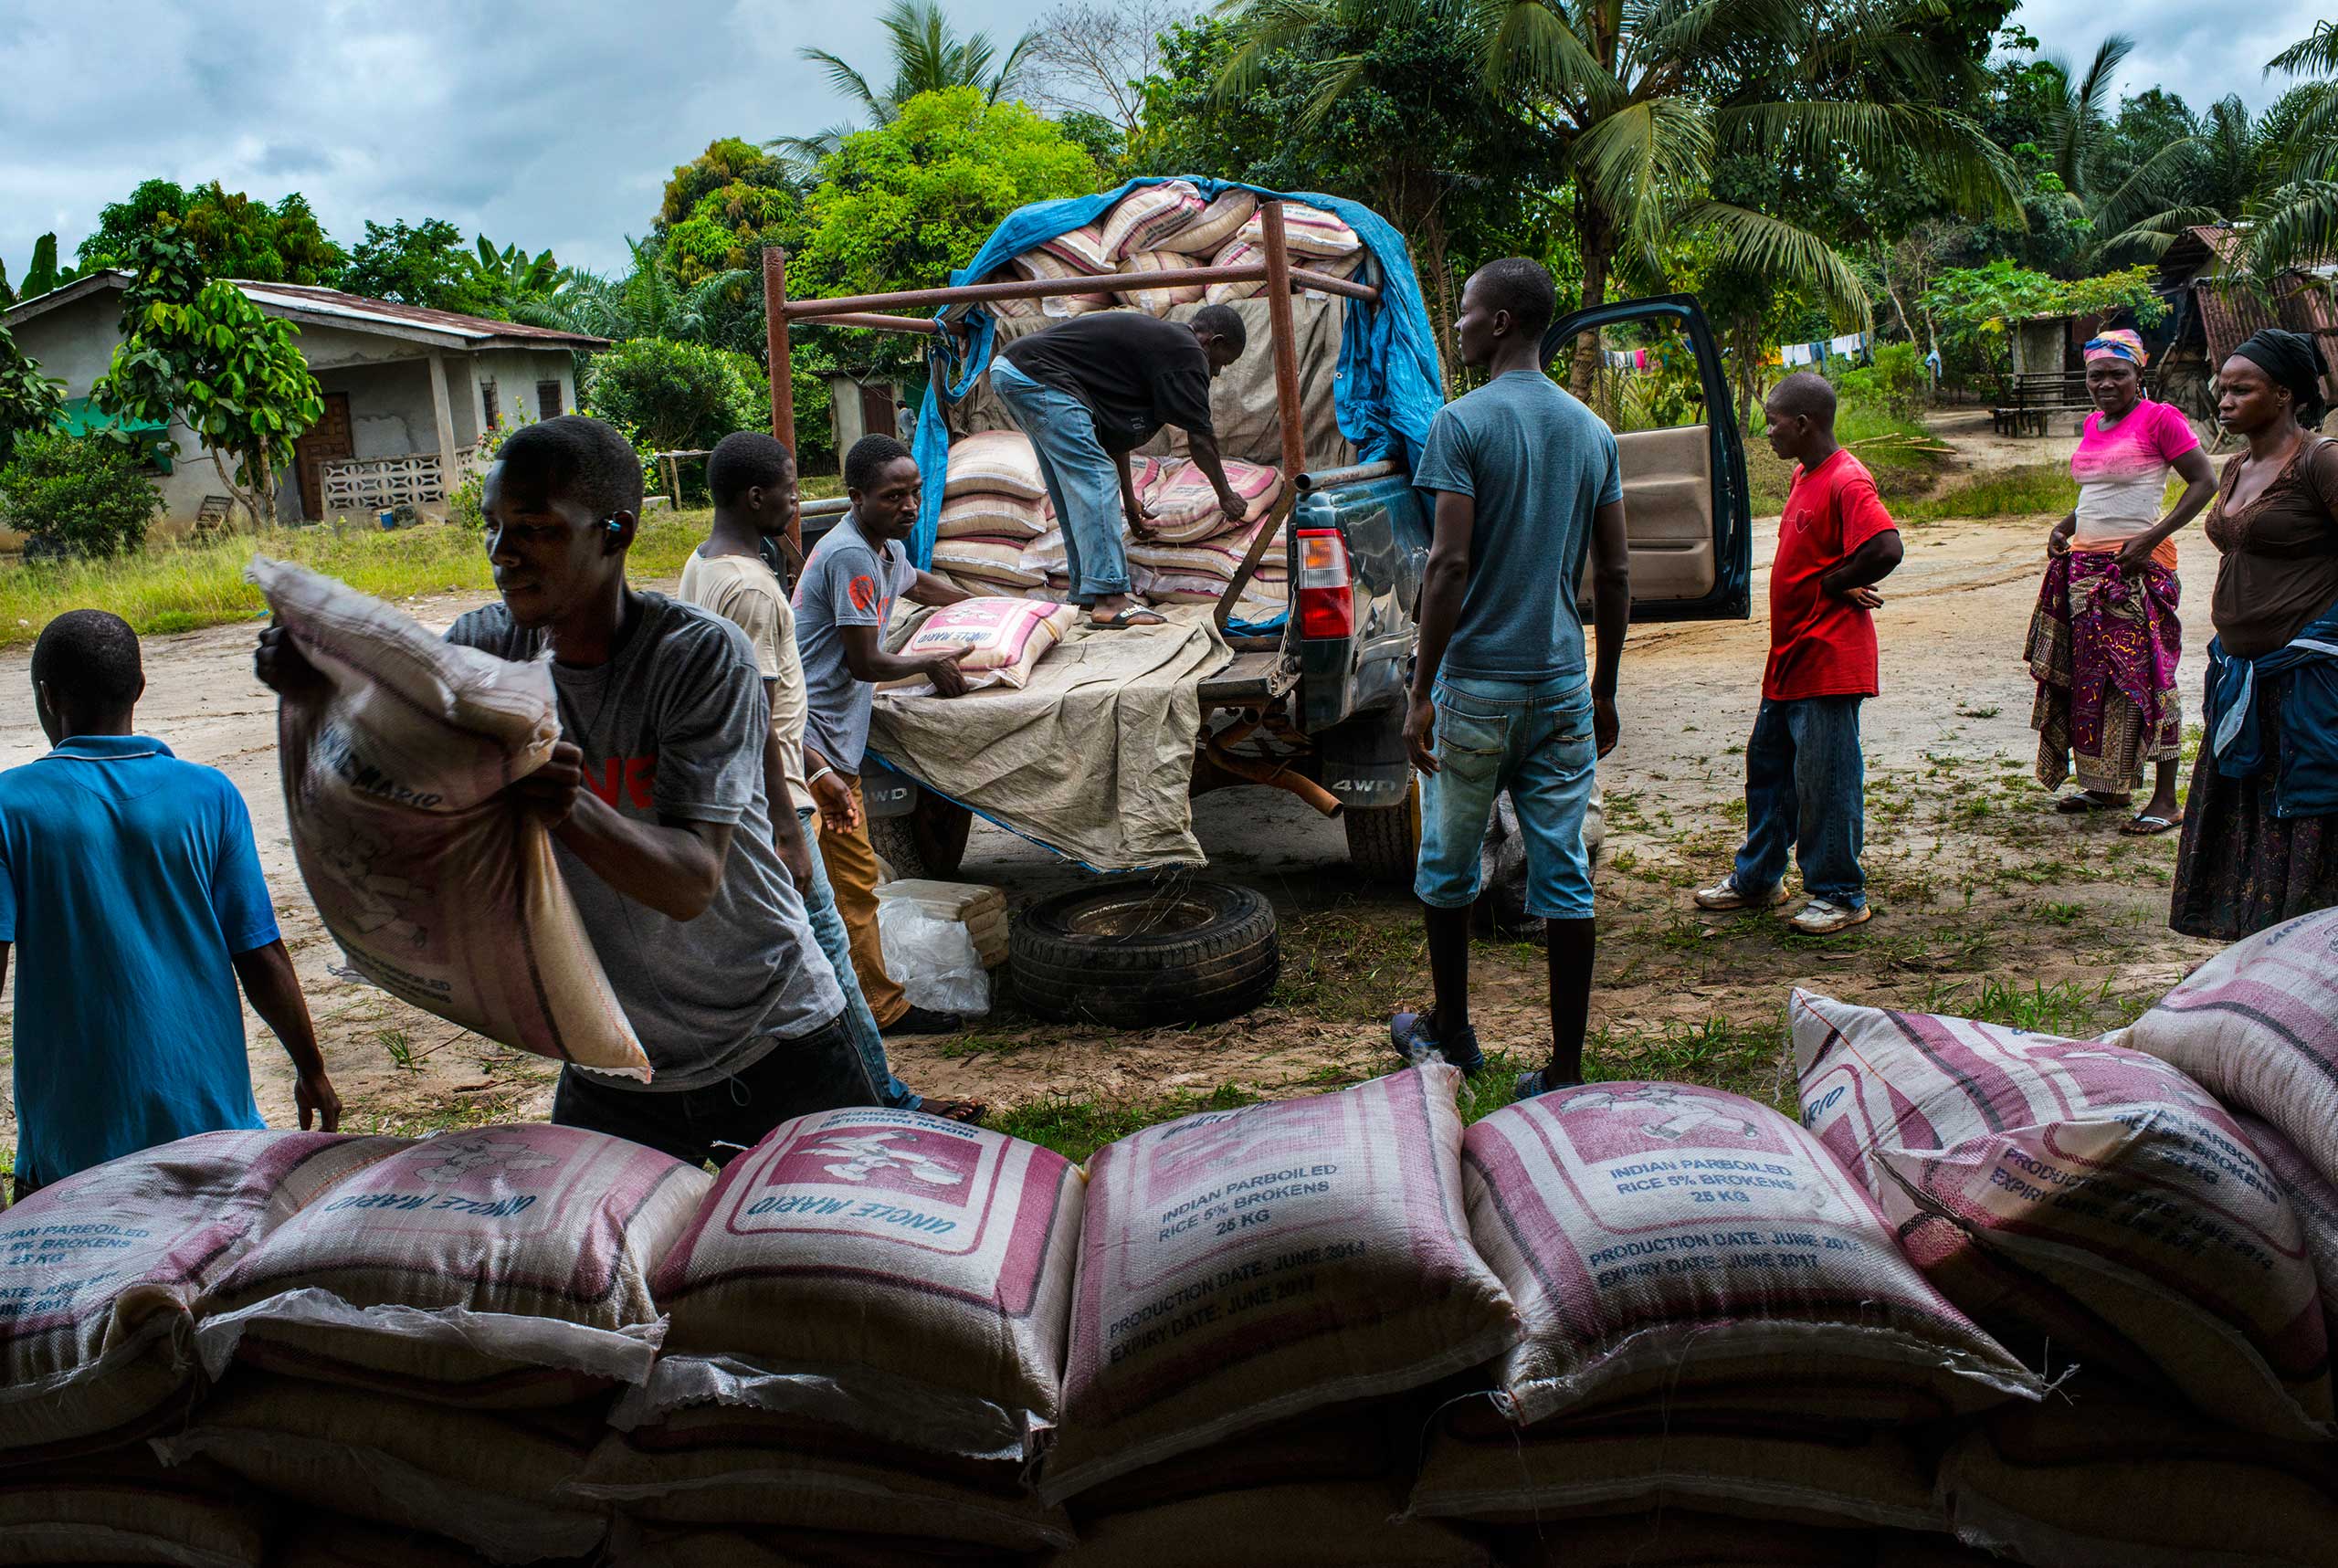 Staff from Orphan Aid, Liberia unload a truck of food and supplies for families affected by Ebola on Nov. 5, 2014 in Dolo's Town, Liberia.